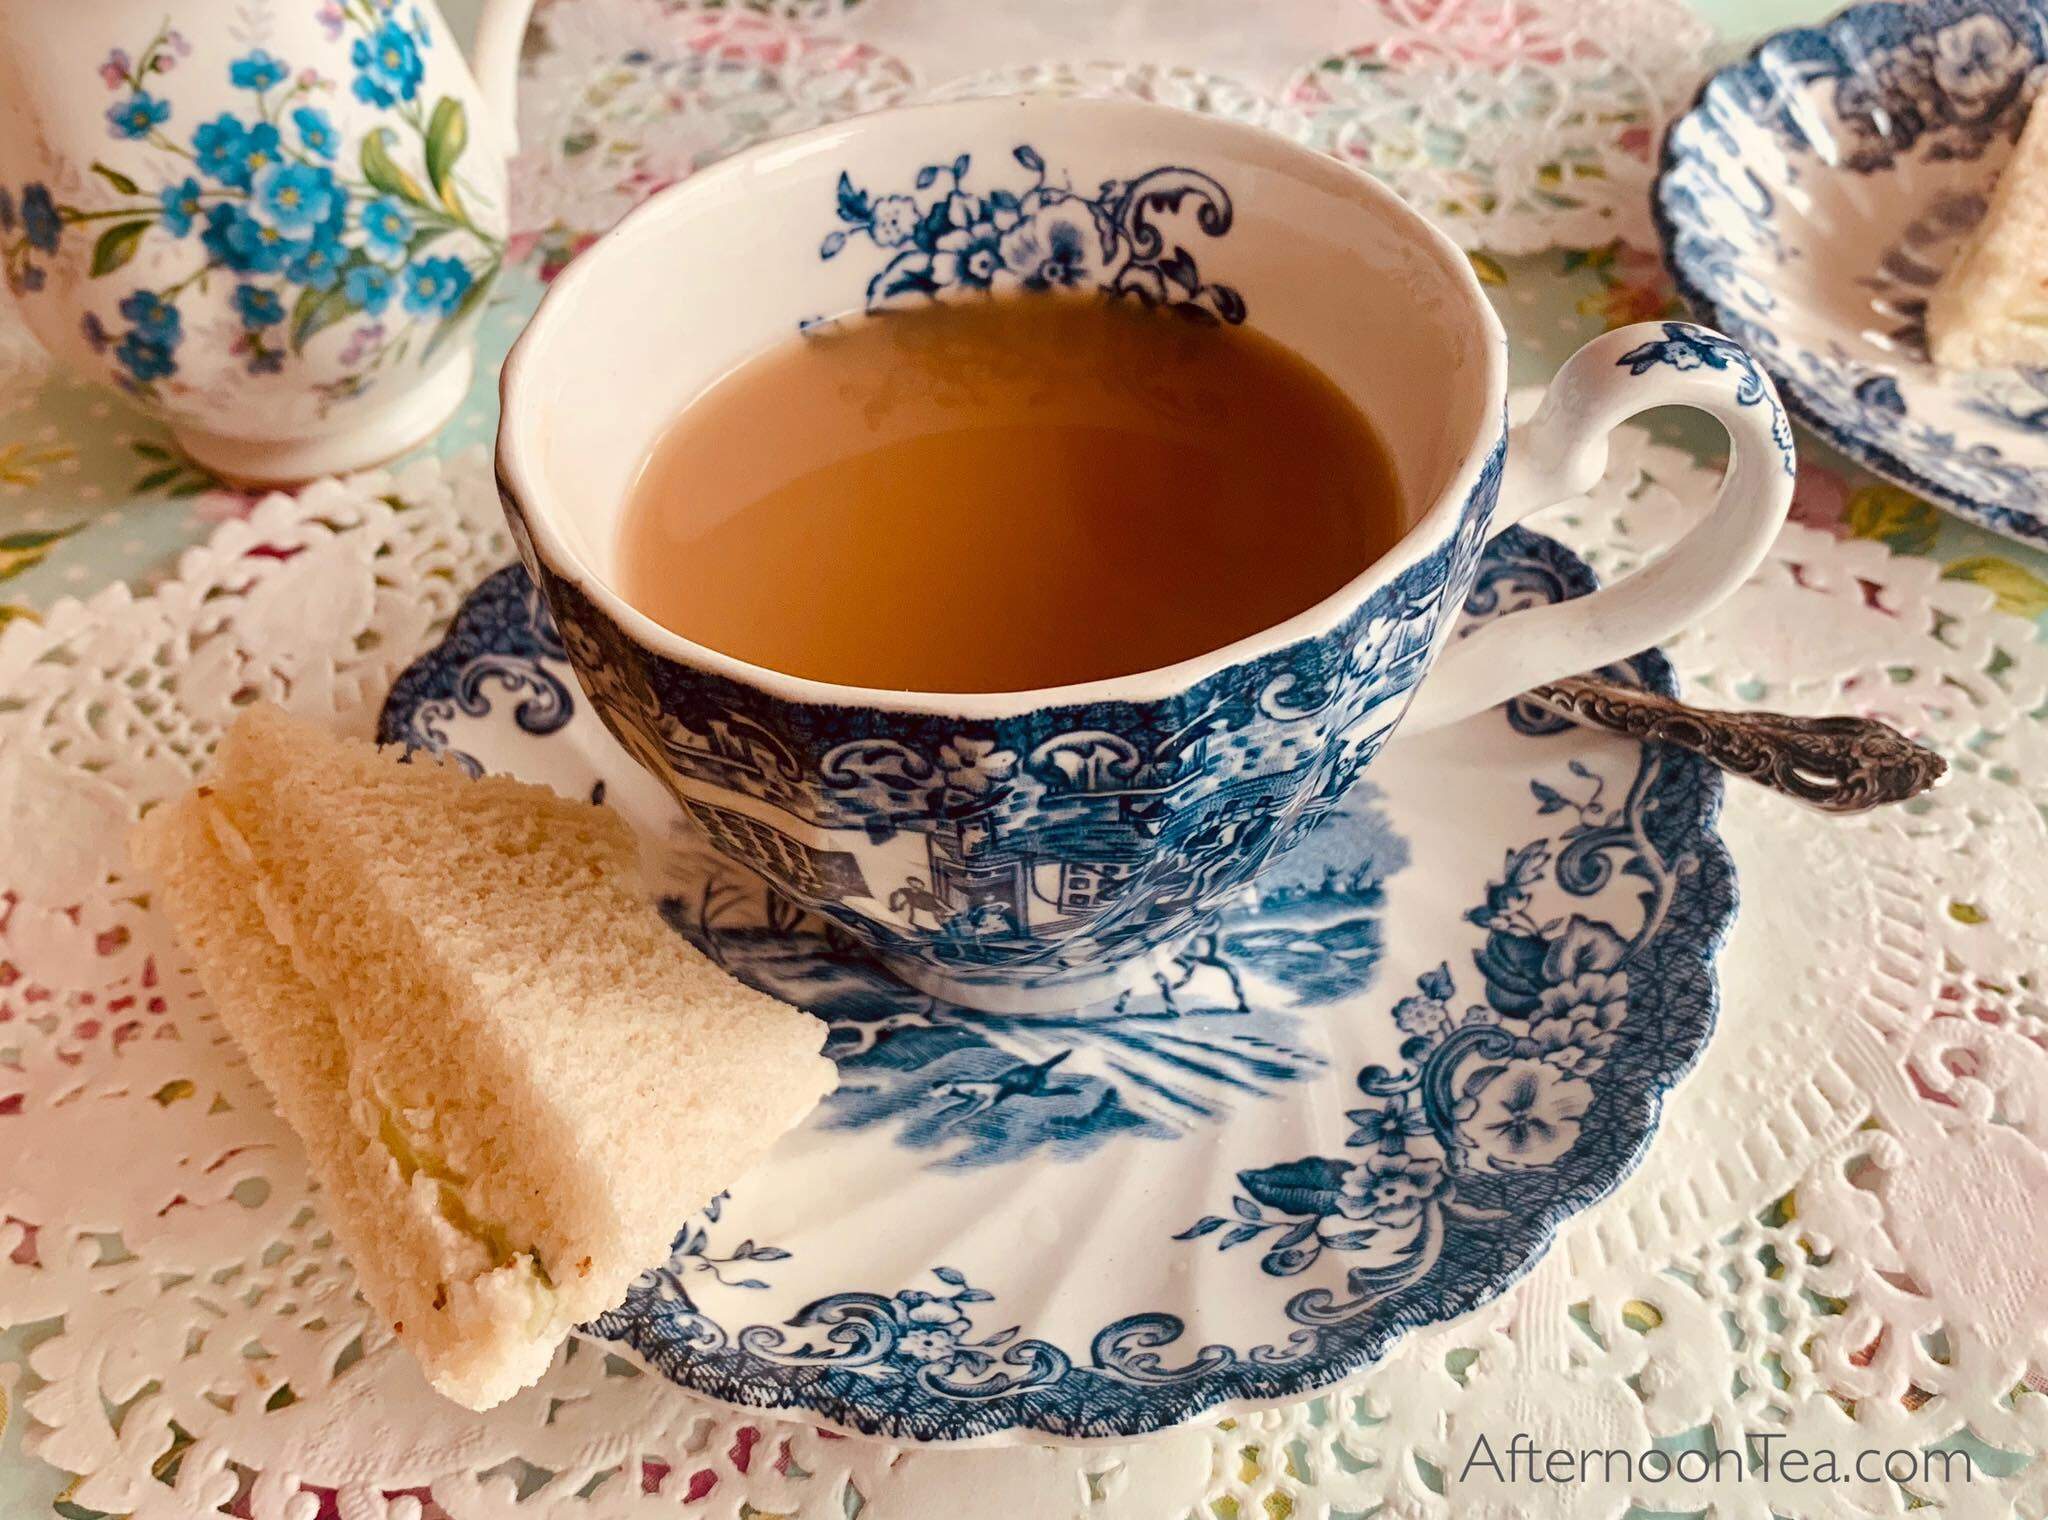 Tea and a sandwich at Fancy That tea house in Walpole. (Photo courtesy of Fancy That)